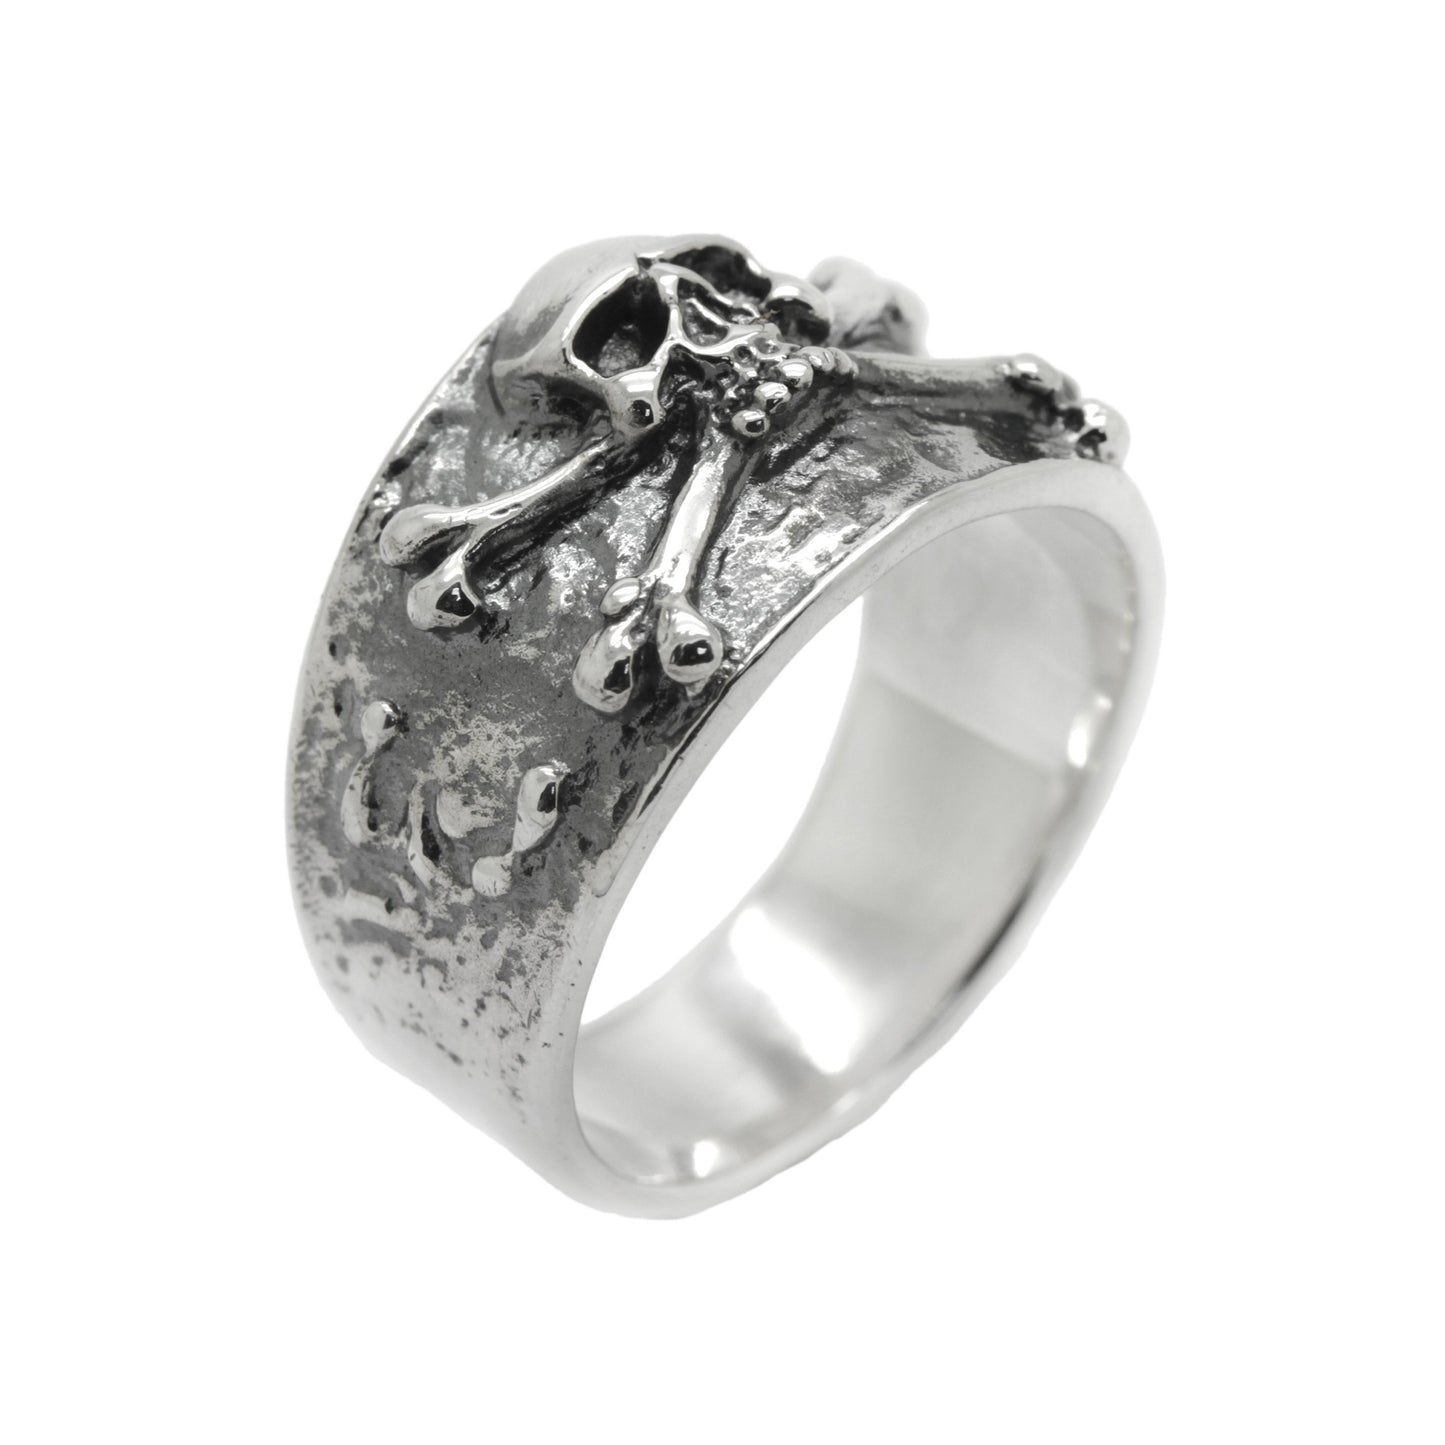 A Huge Skull and Bones Band Mens Silver Ring, Jolly Roger Pirate Ring Men